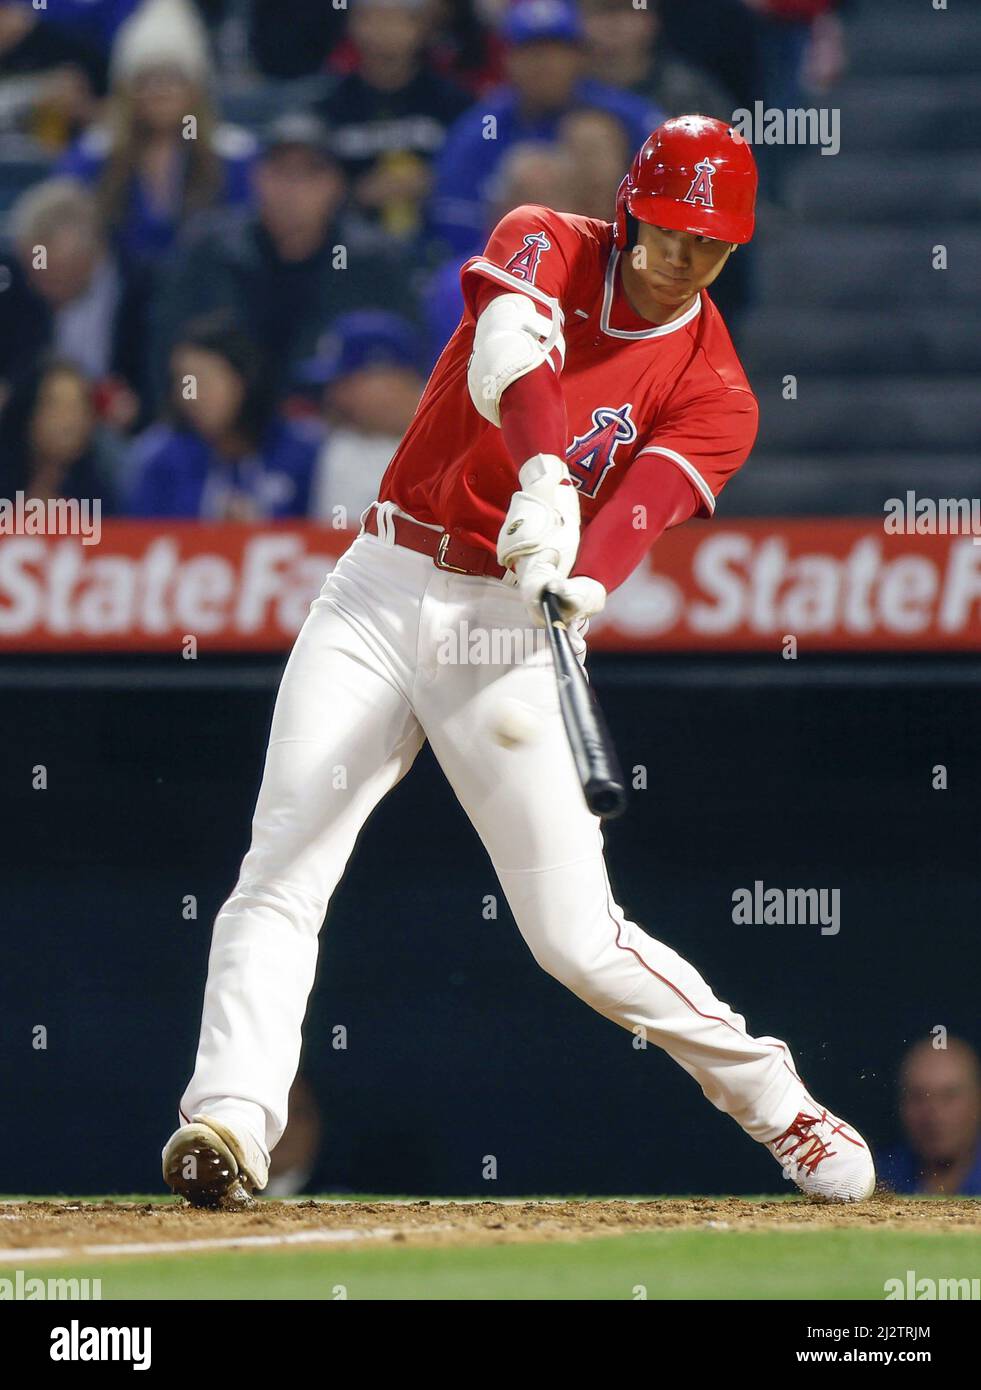 Shohei Ohtani of the Los Angeles Angels hits a solo home run in